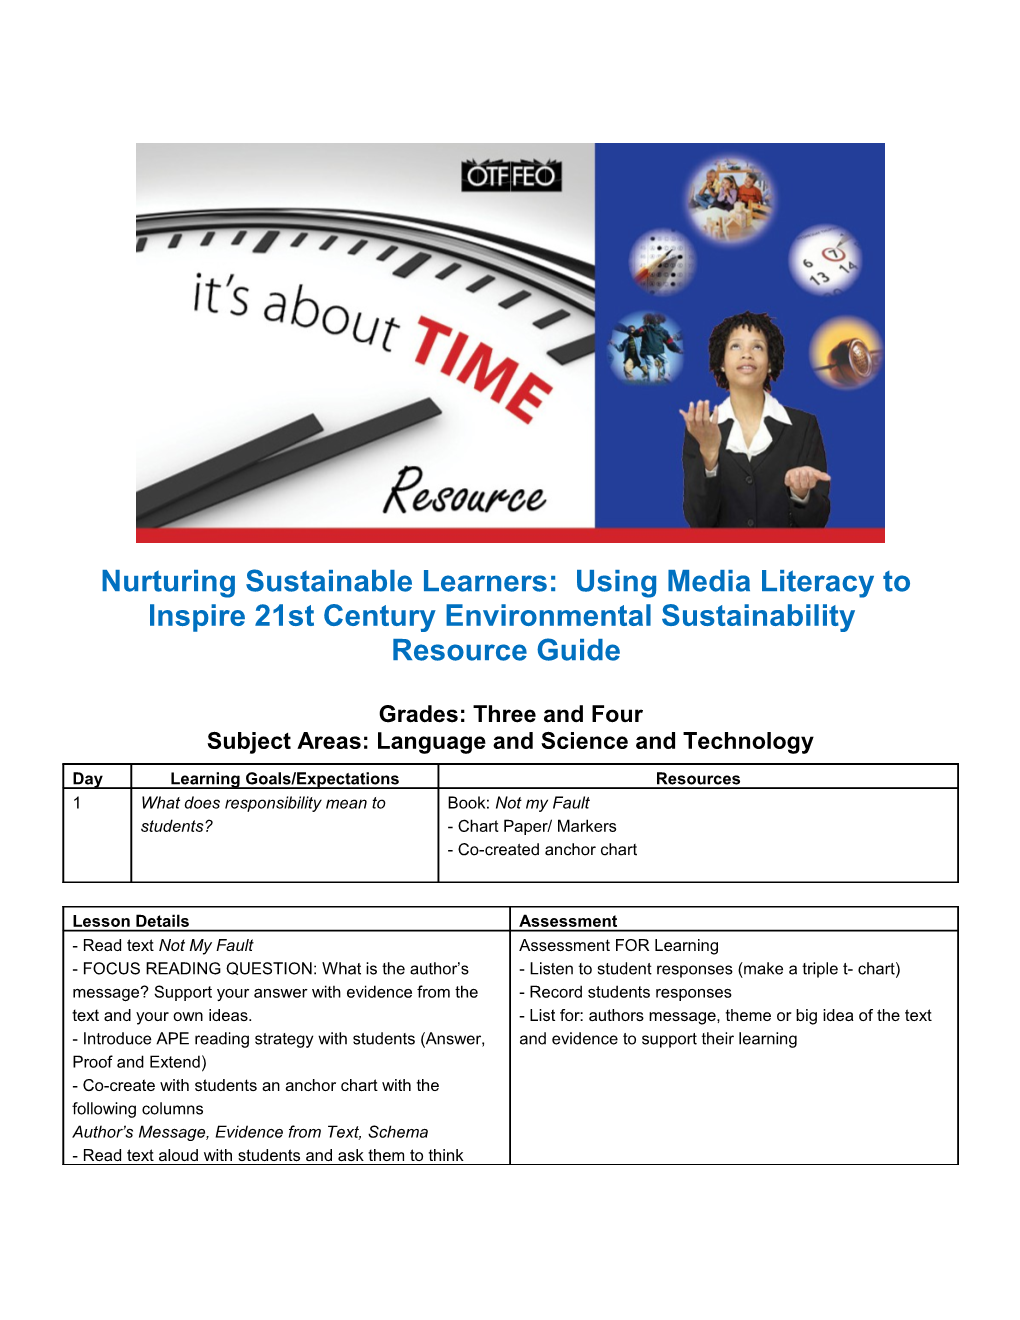 Nurturing Sustainable Learners: Using Media Literacy to Inspire 21St Century Environmental